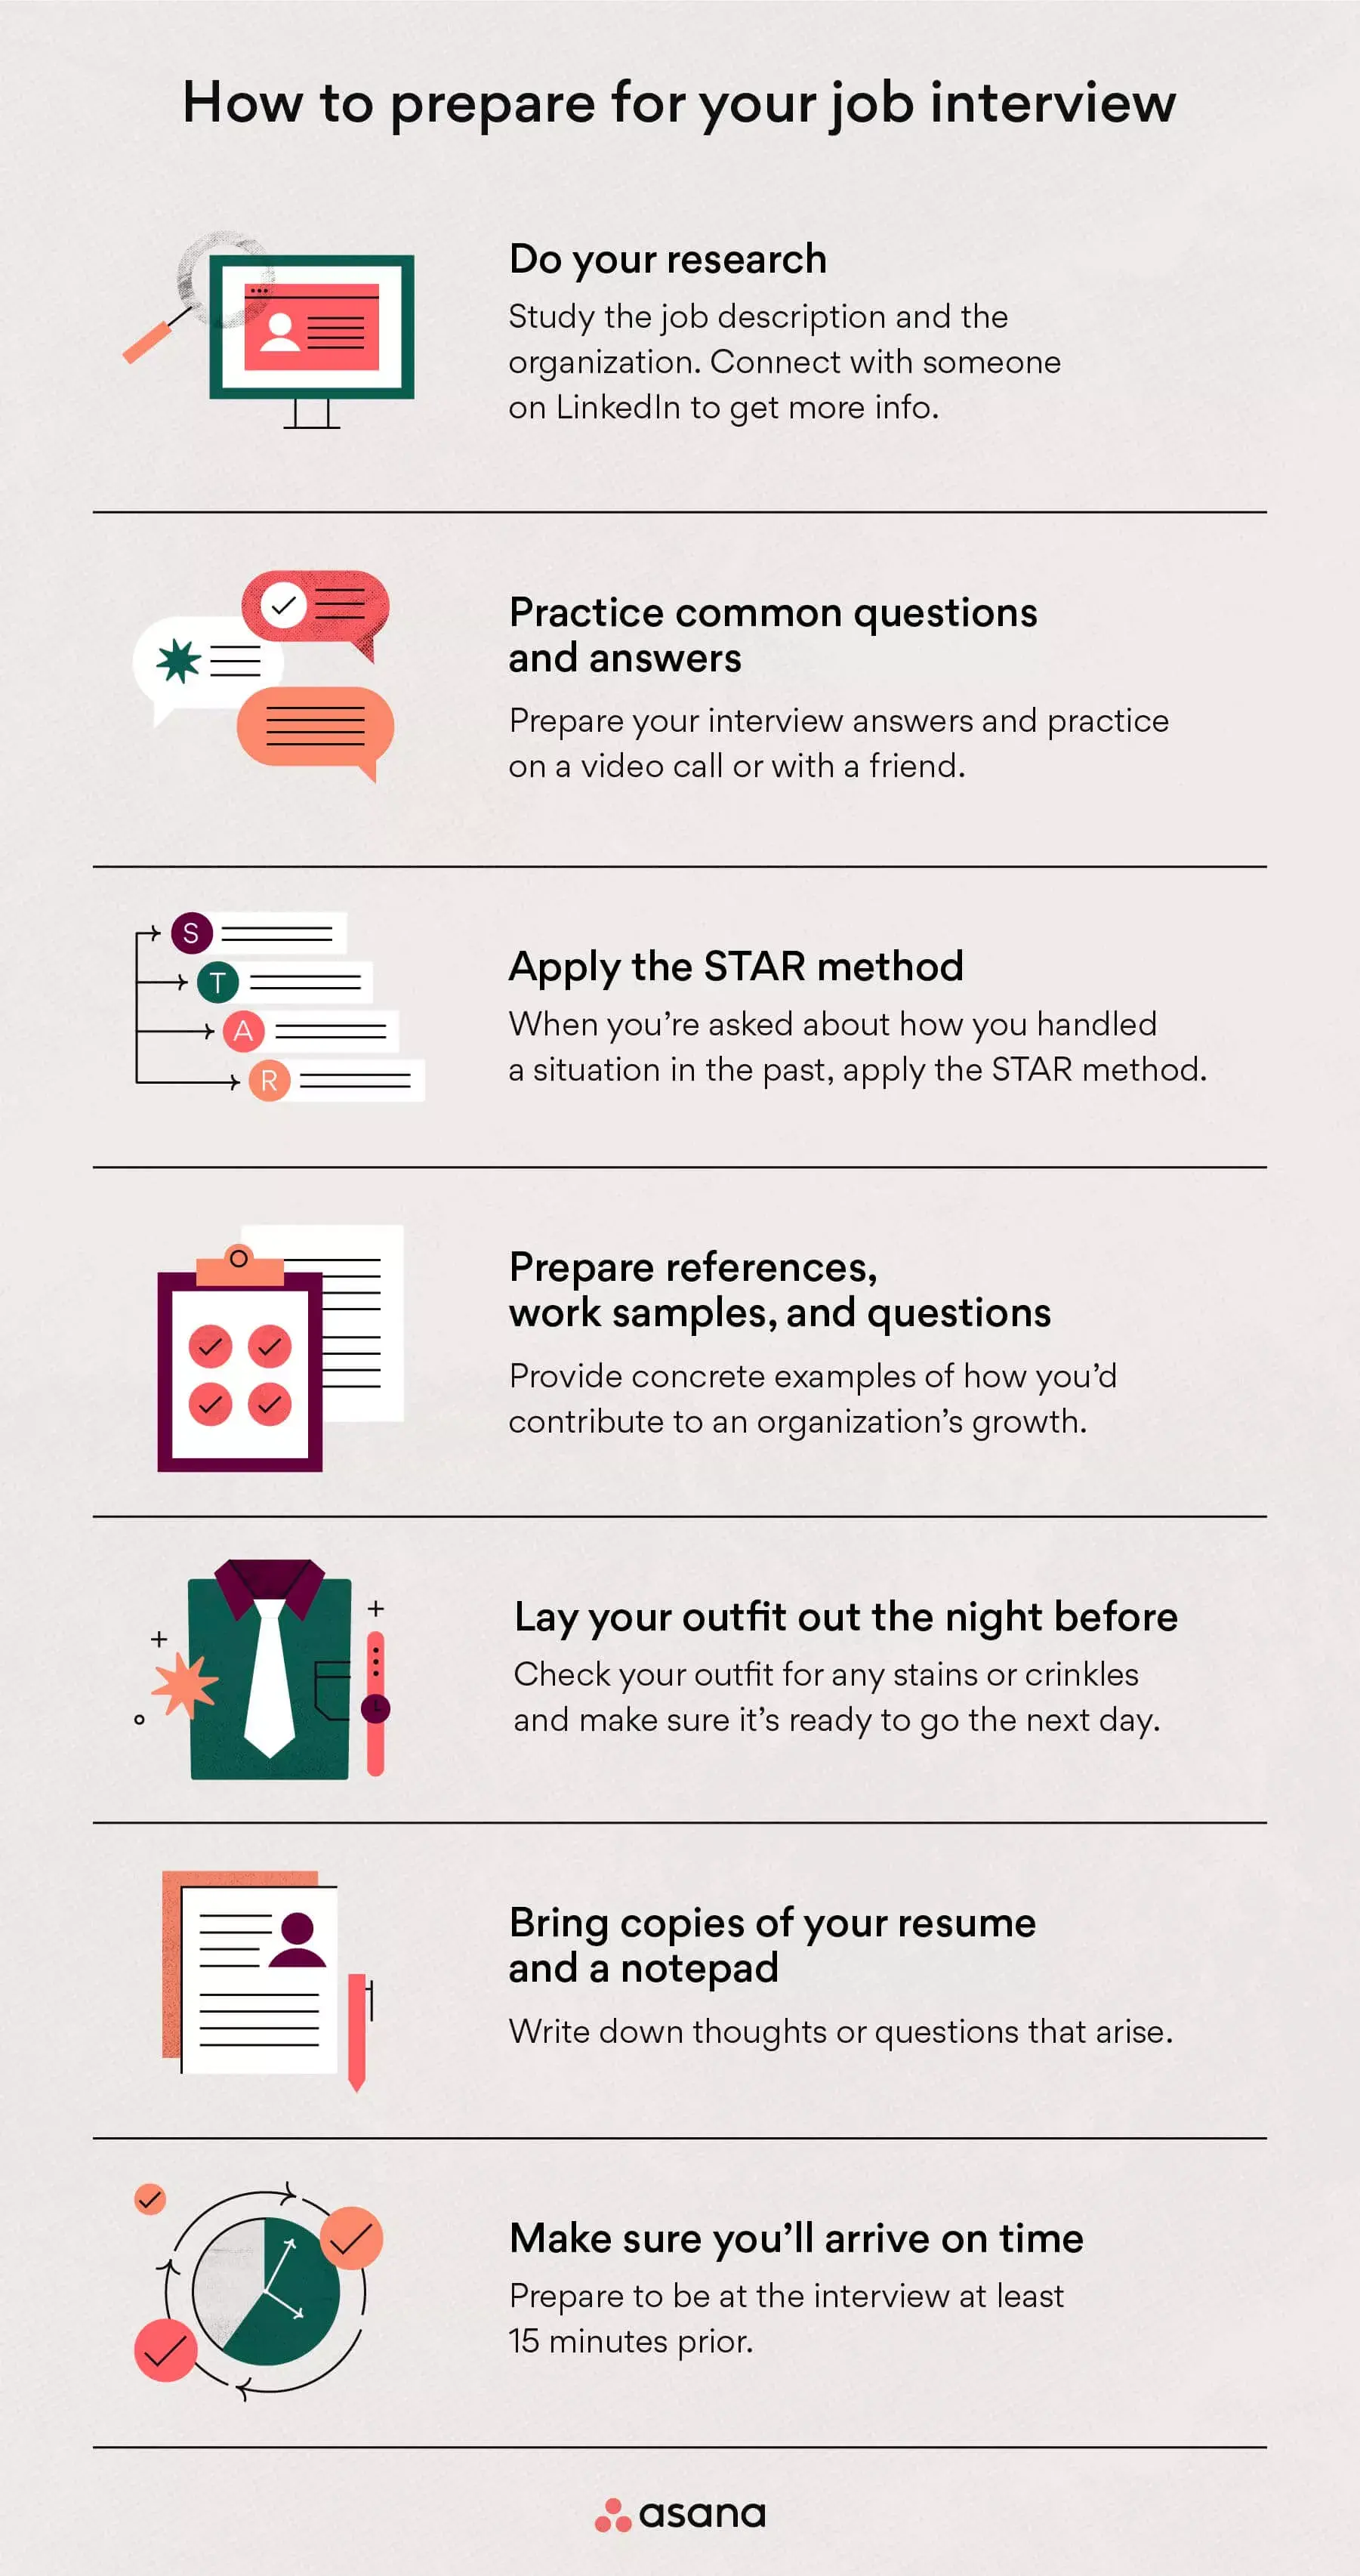 [inline illustration] how to prepare for your job interview (infographic)